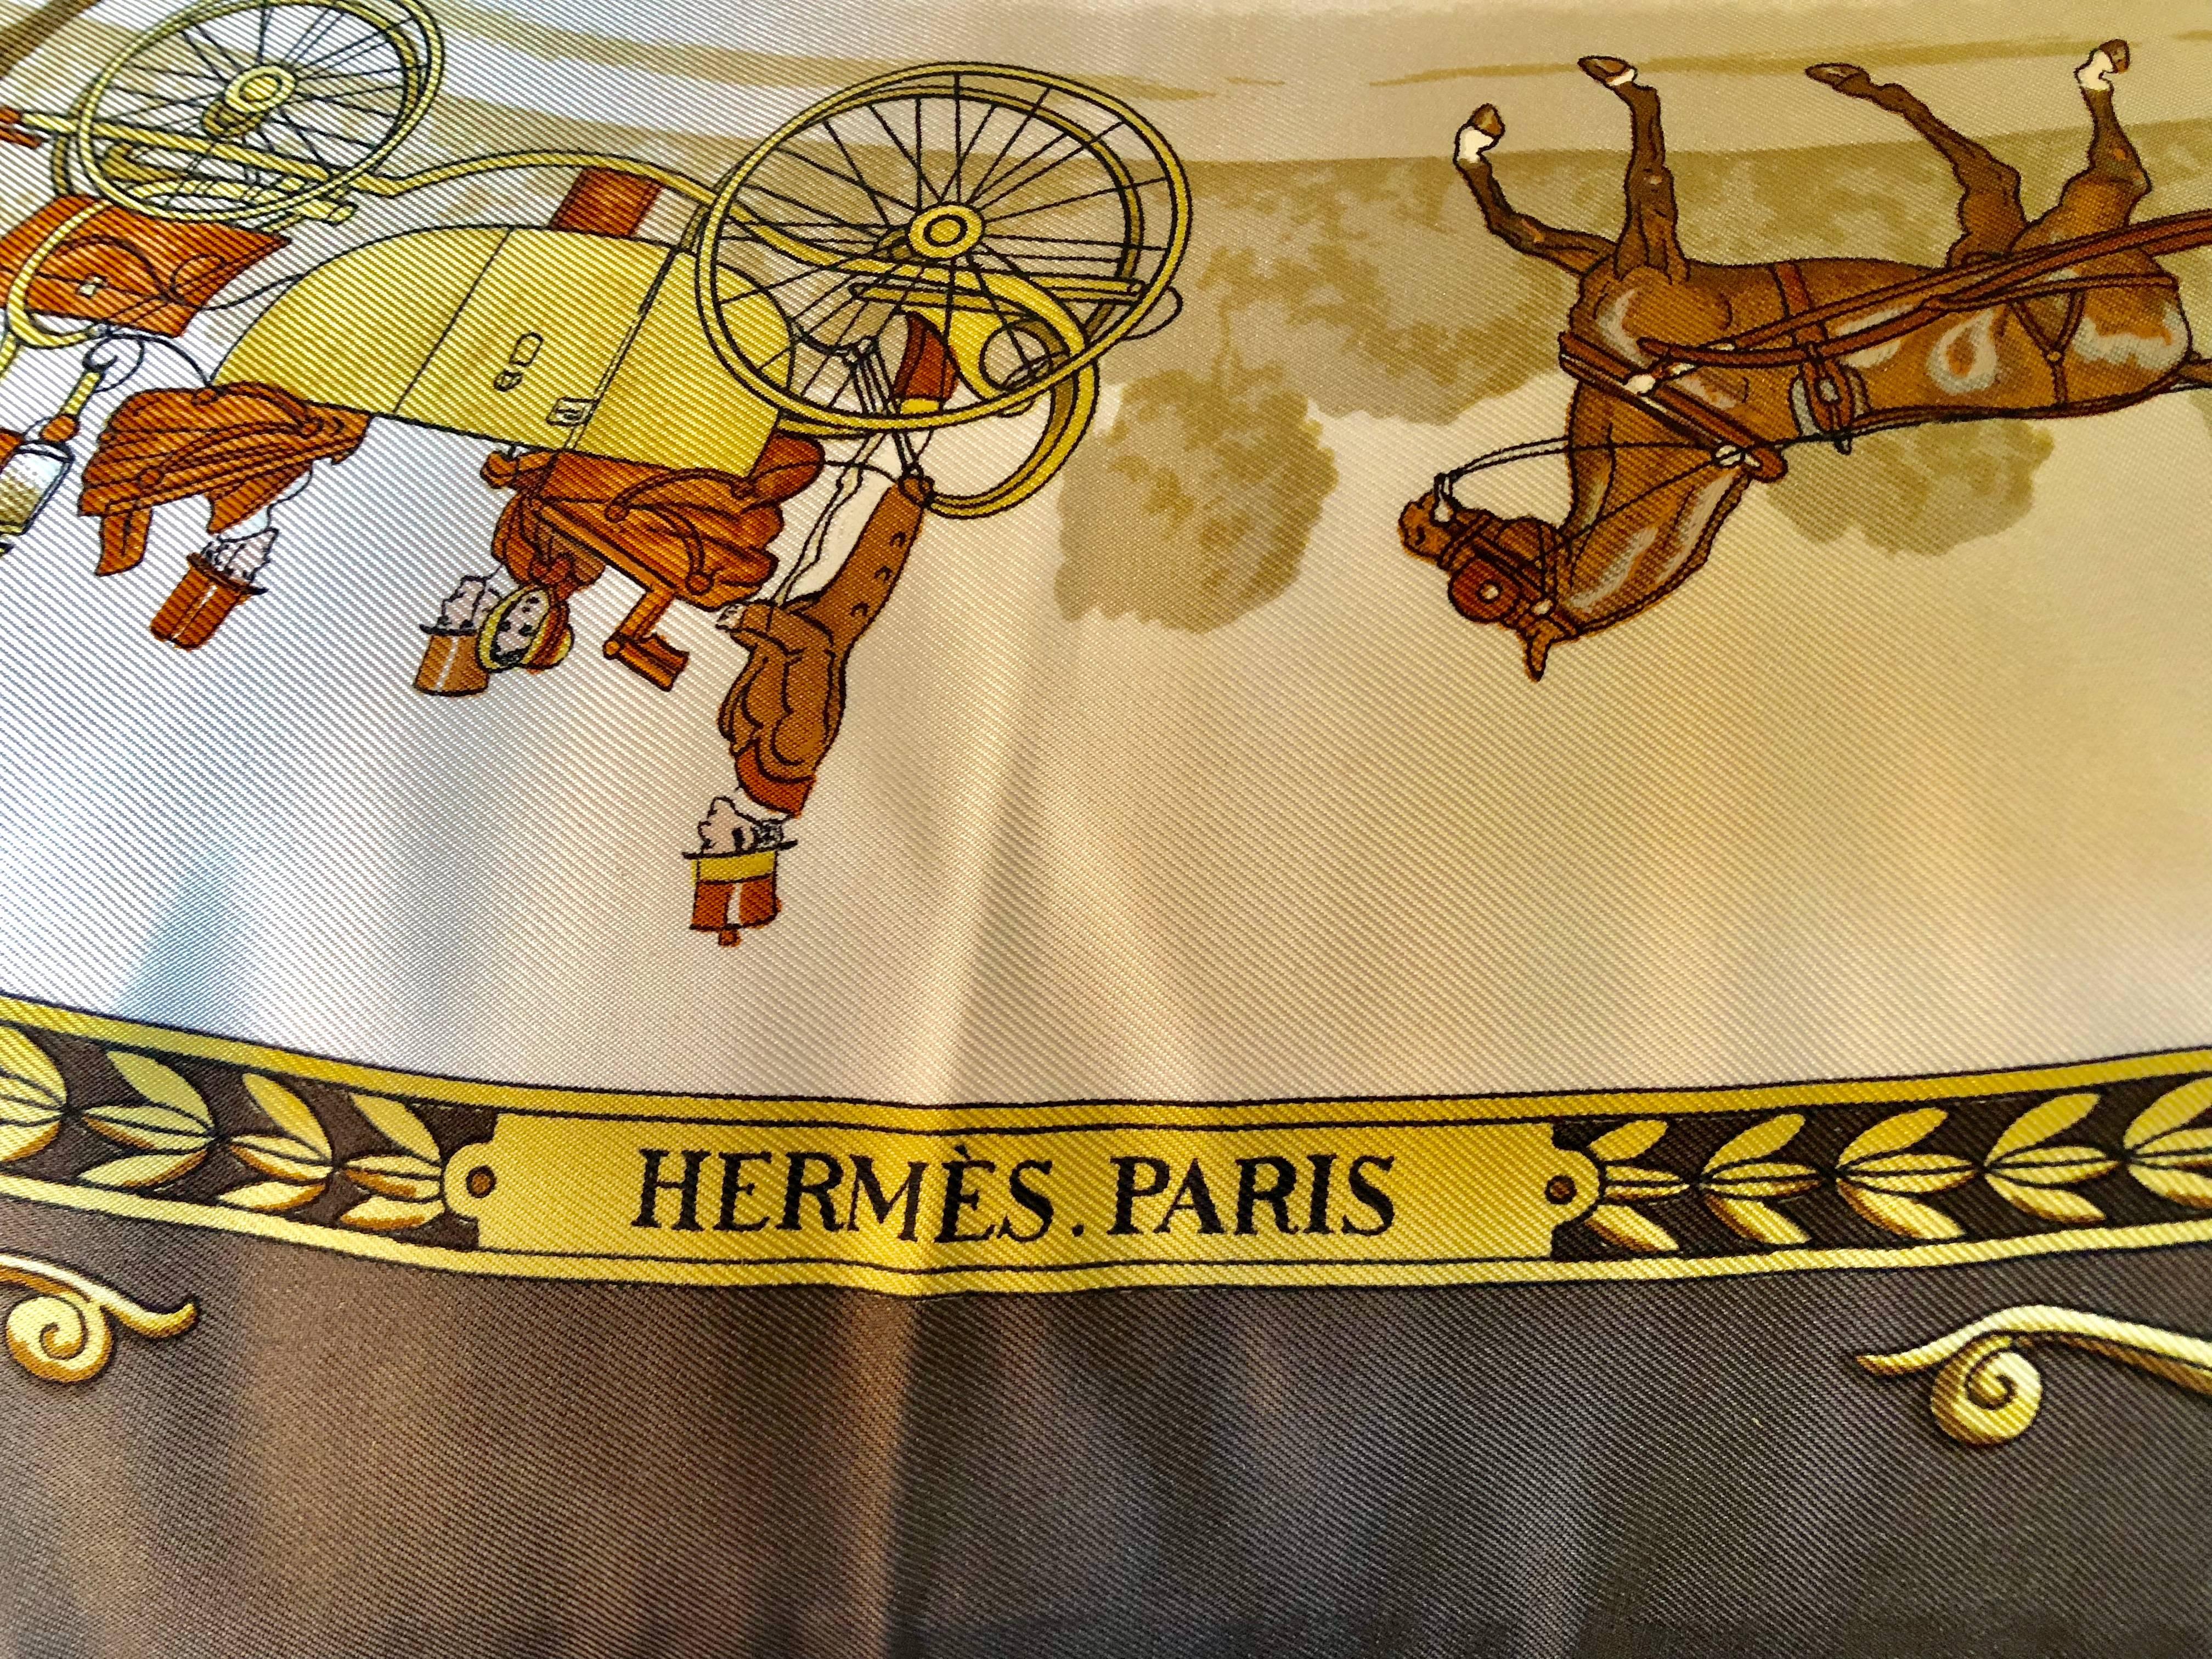 Enormous Hermes 'La Promenade De Longchamps' overstuffed silk pillow. One out of a large collection of vintage throw or show pillows with the original Hermes tag in fine condition. These pillows will certainly make a show or add conversation as